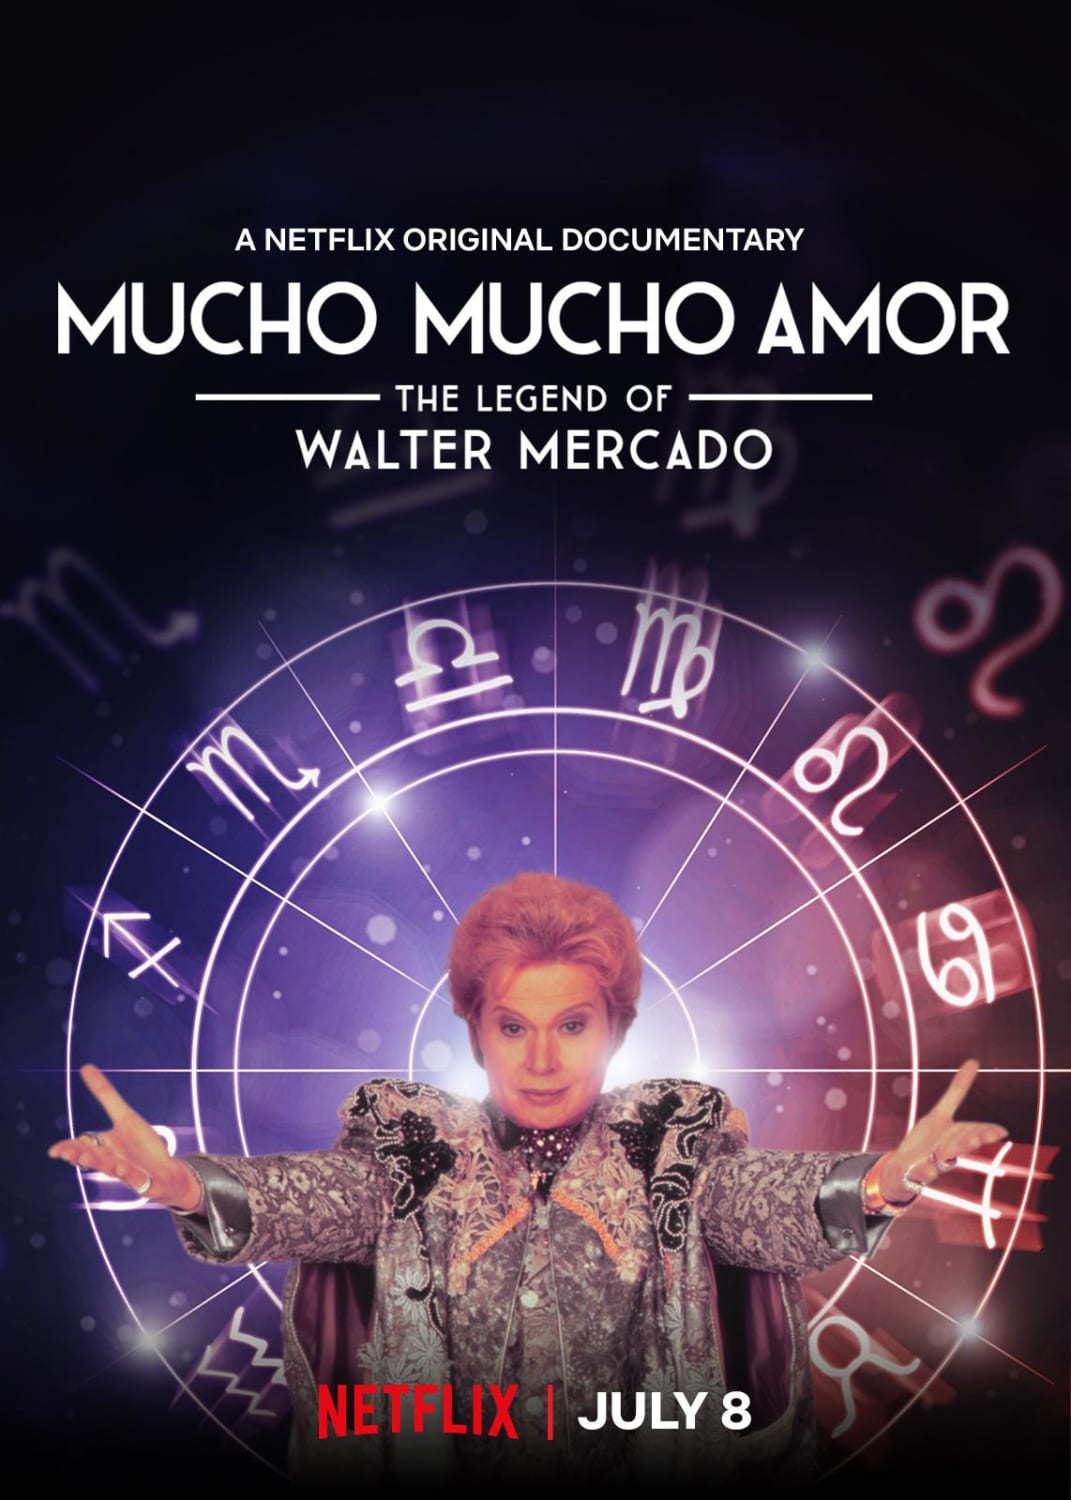 Hi! I’m one of the filmmakers of this new doc about Walter Mercado called “Mucho Mucho Amor” which premieres today on Netflix. For a lot of us growing up, Walter was the time we had to be absolutely quiet or Abuela would flip out on us. We hope you’ll watch! Mucho Mucho Amor to you all! ❤️